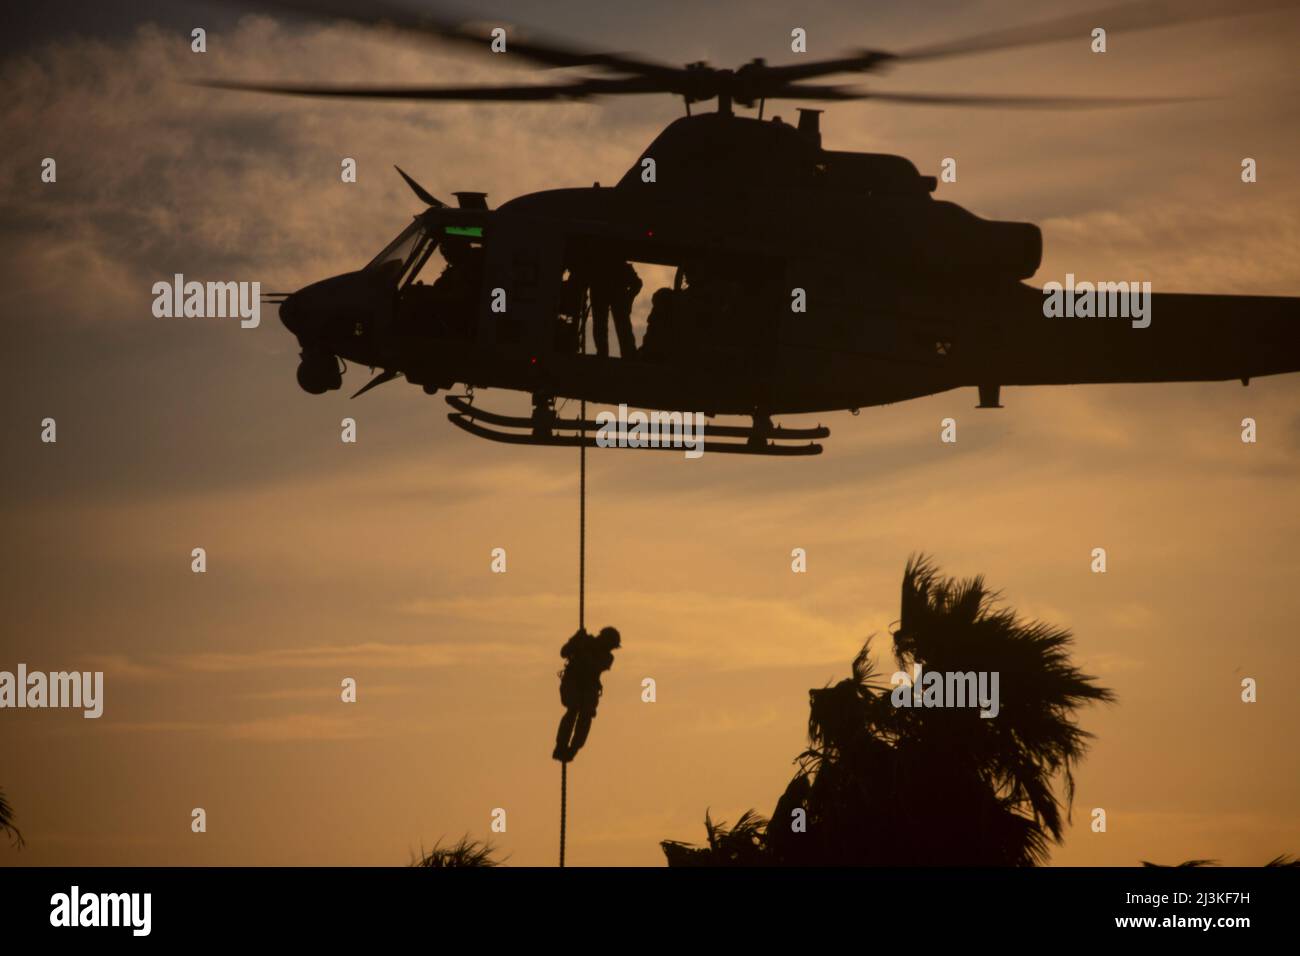 U.S. Marines assigned to Marine Aviation Weapons and Tactics Squadron One (MAWTS-1), conduct fast rope insertion exercises during Weapons and Tactics Instructor (WTI) course 2-22, at K-9 Village, Yuma Proving Grounds, Arizona, April 2, 2022. WTI is a seven-week training event hosted by MAWTS-1, providing standardized advanced tactical training and certification of unit instructor qualifications to support Marine aviation training and readiness, and assists in developing and employing aviation weapons and tactics. (U.S. Marine Corps photo by Lance Cpl. Daniel Childs) Stock Photo